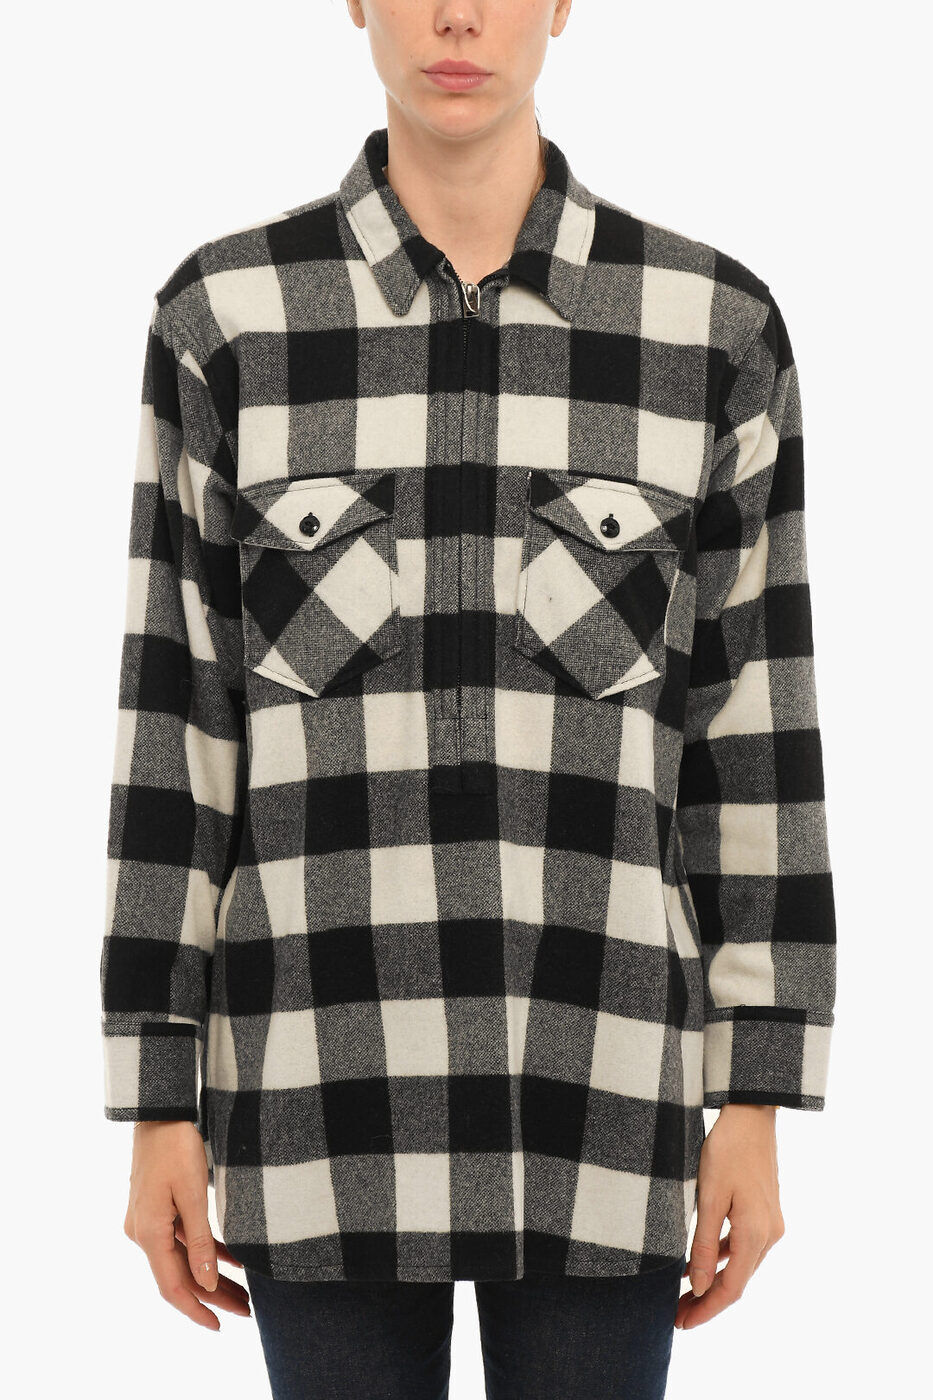 WOOLRICH ウールリッチ シャツ COWWOSH0010UT1704 8649 レディース ARCHIVE BUFFALO CHECKED POPOVER OVERSHIRT WITH DOUBLE BREAST 【関税・送料無料】【ラッピング無料】 dk